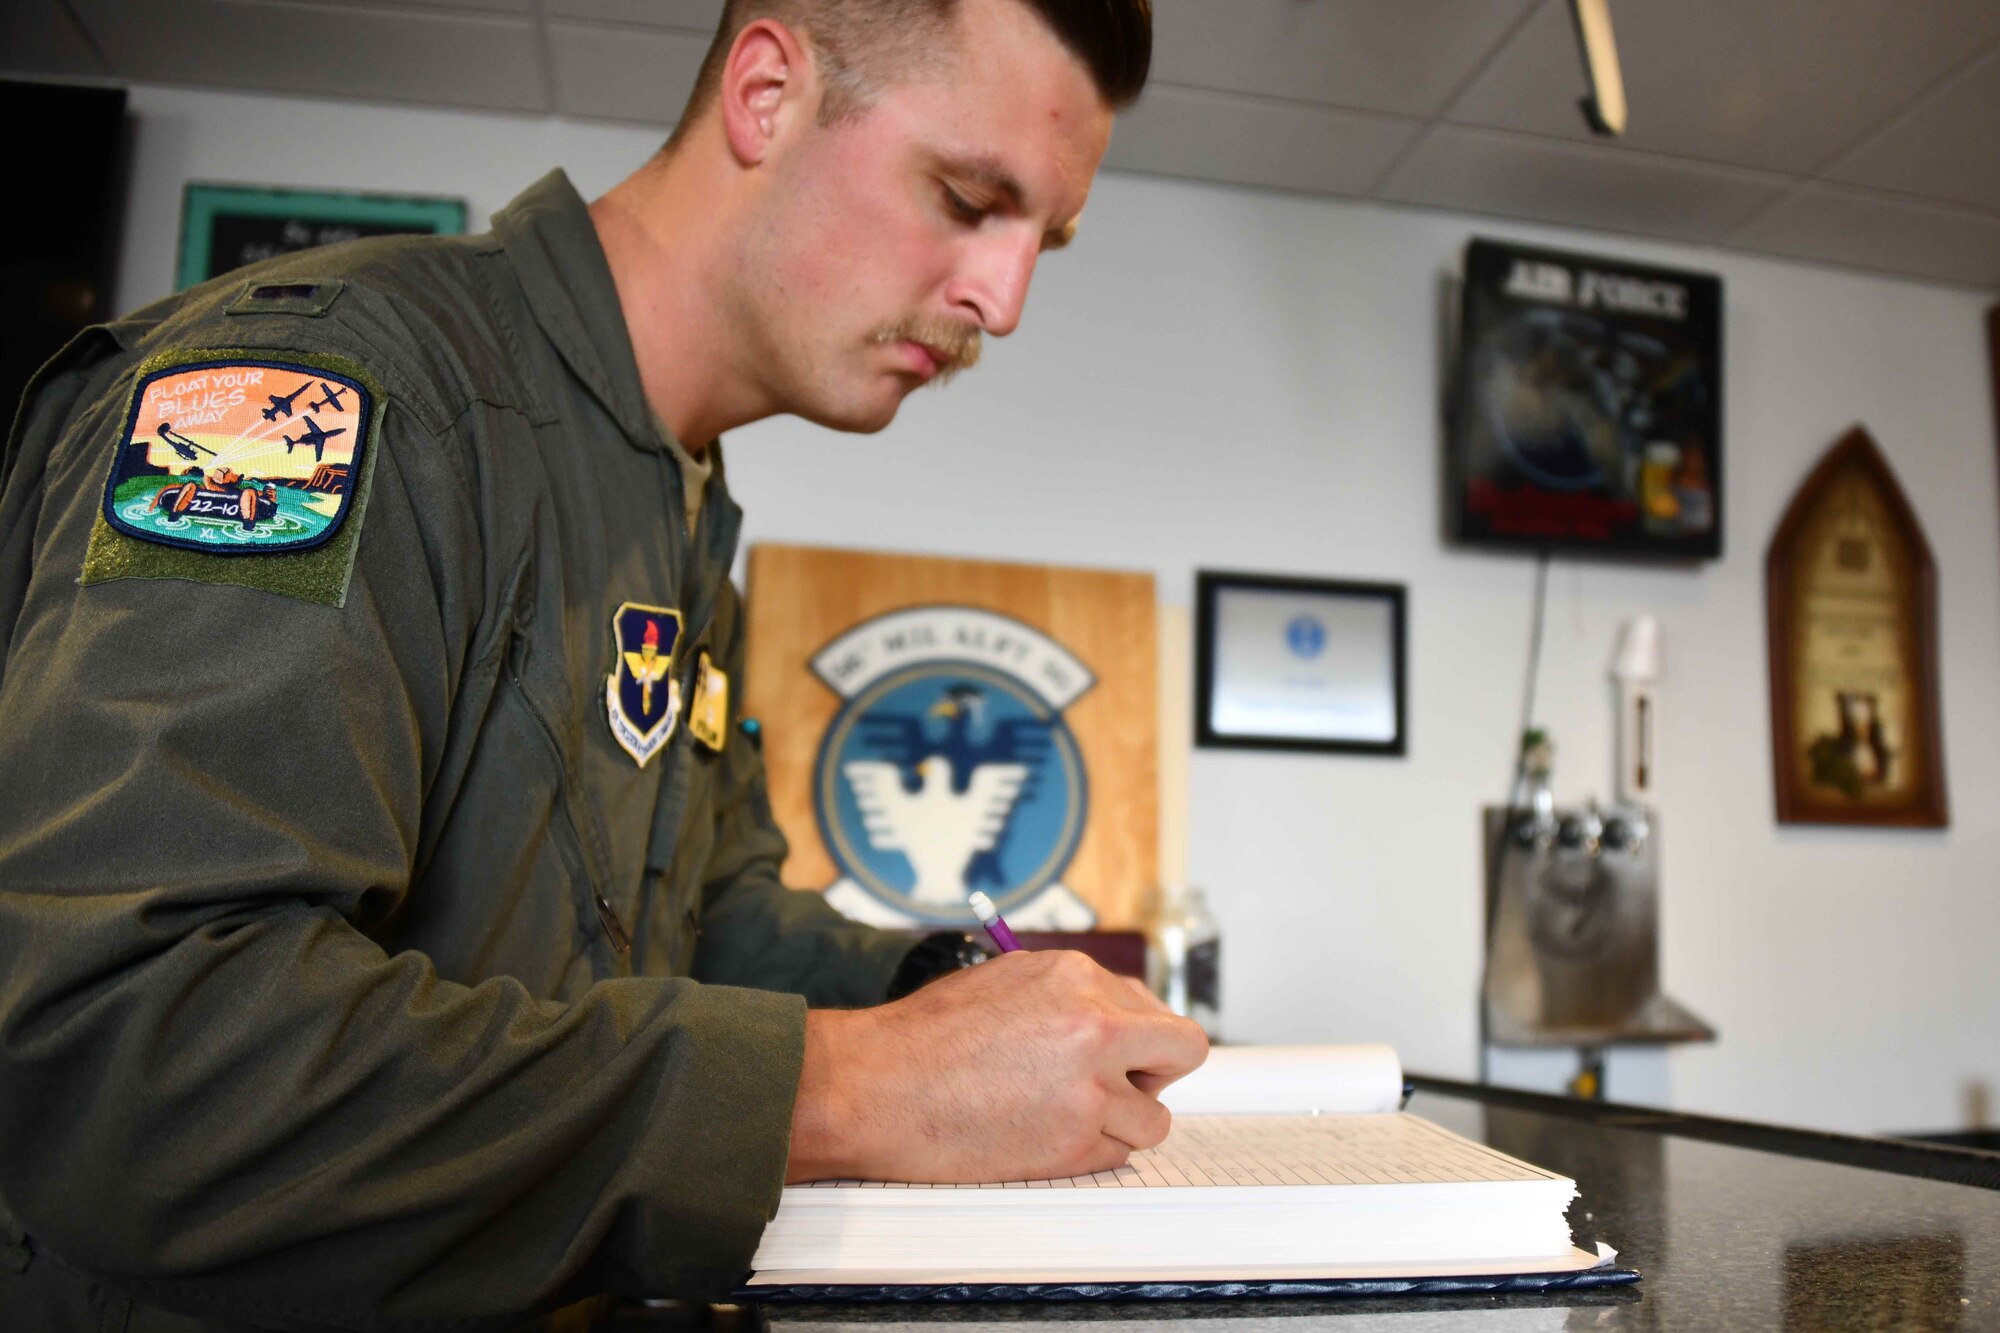 1st Lt. Wyatt Starr, 56th Air Refueling Squadron copilot in training, signs his name in “The Book” at Altus Air Force Base (AFB), Oklahoma, Nov. 3, 2022. It is a tradition for the students to sign their names in this book after their last training flight at Altus AFB. (U.S. Air Force photo by Airman 1st Class Kari Degraffenreed)